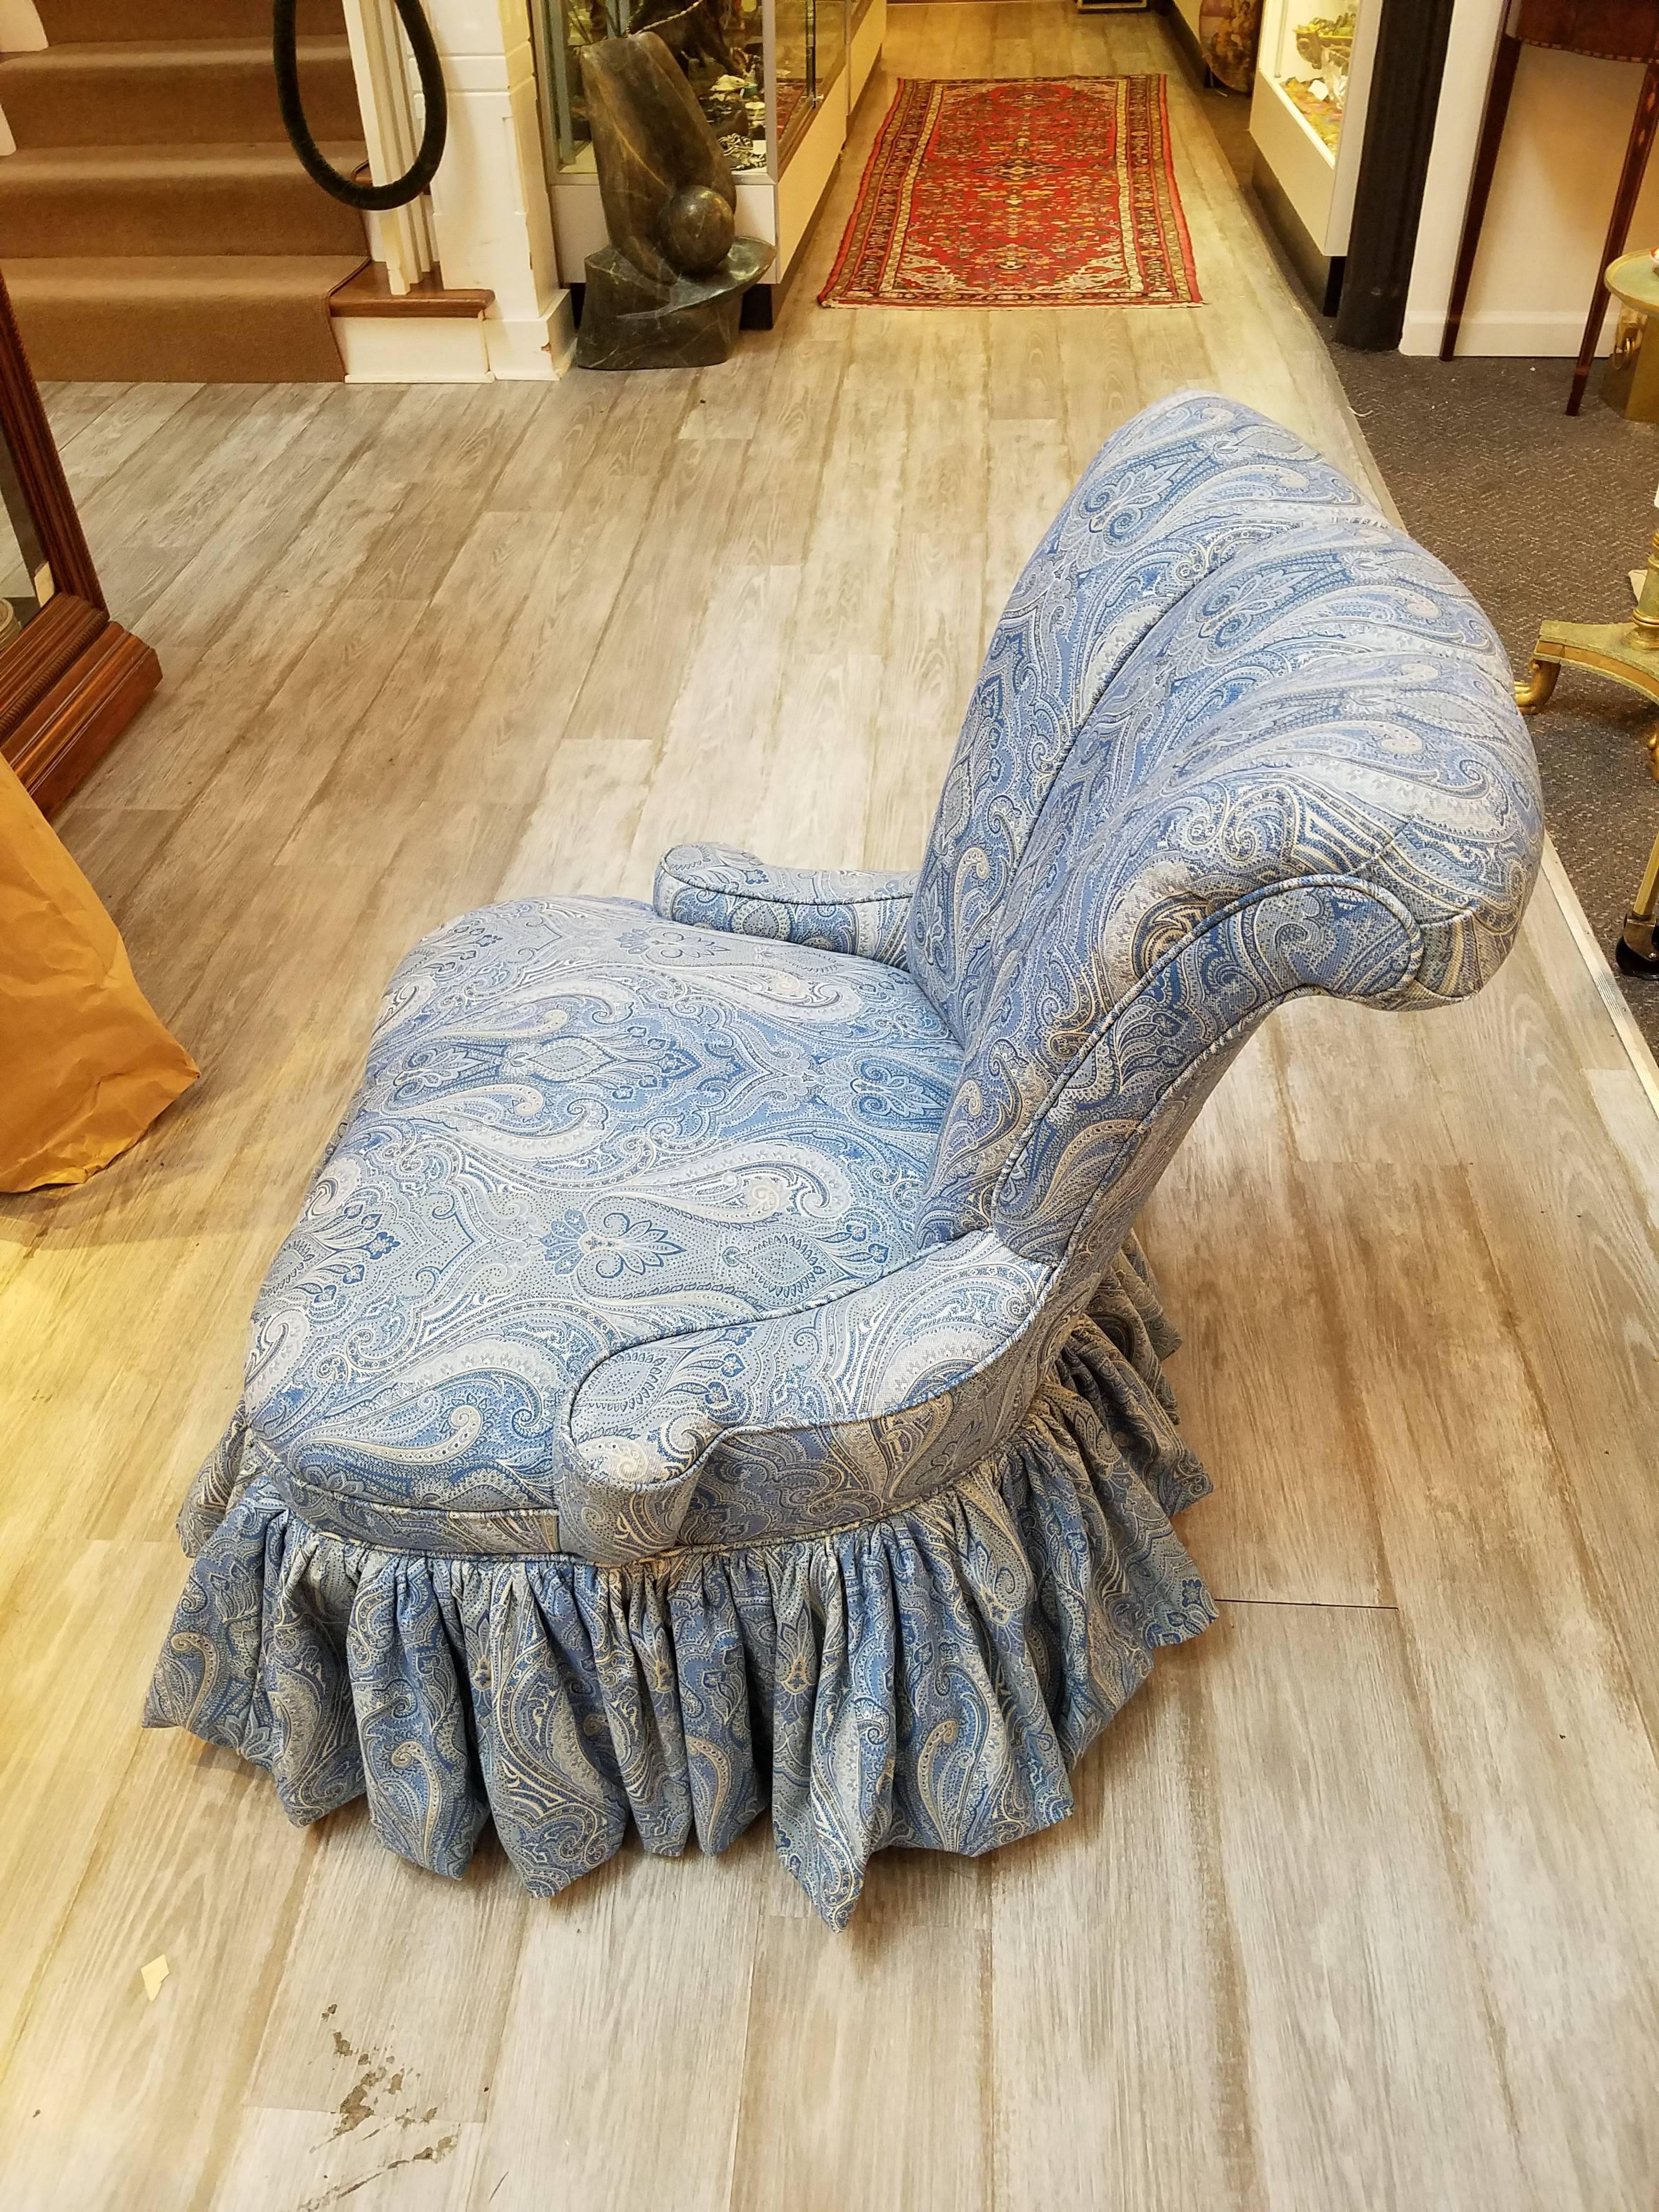 Vintage 1940s channel back slipper chair newly upholstered in Ralph Lauren printed linen blue and white paisley.
Measures: Seat height 15.